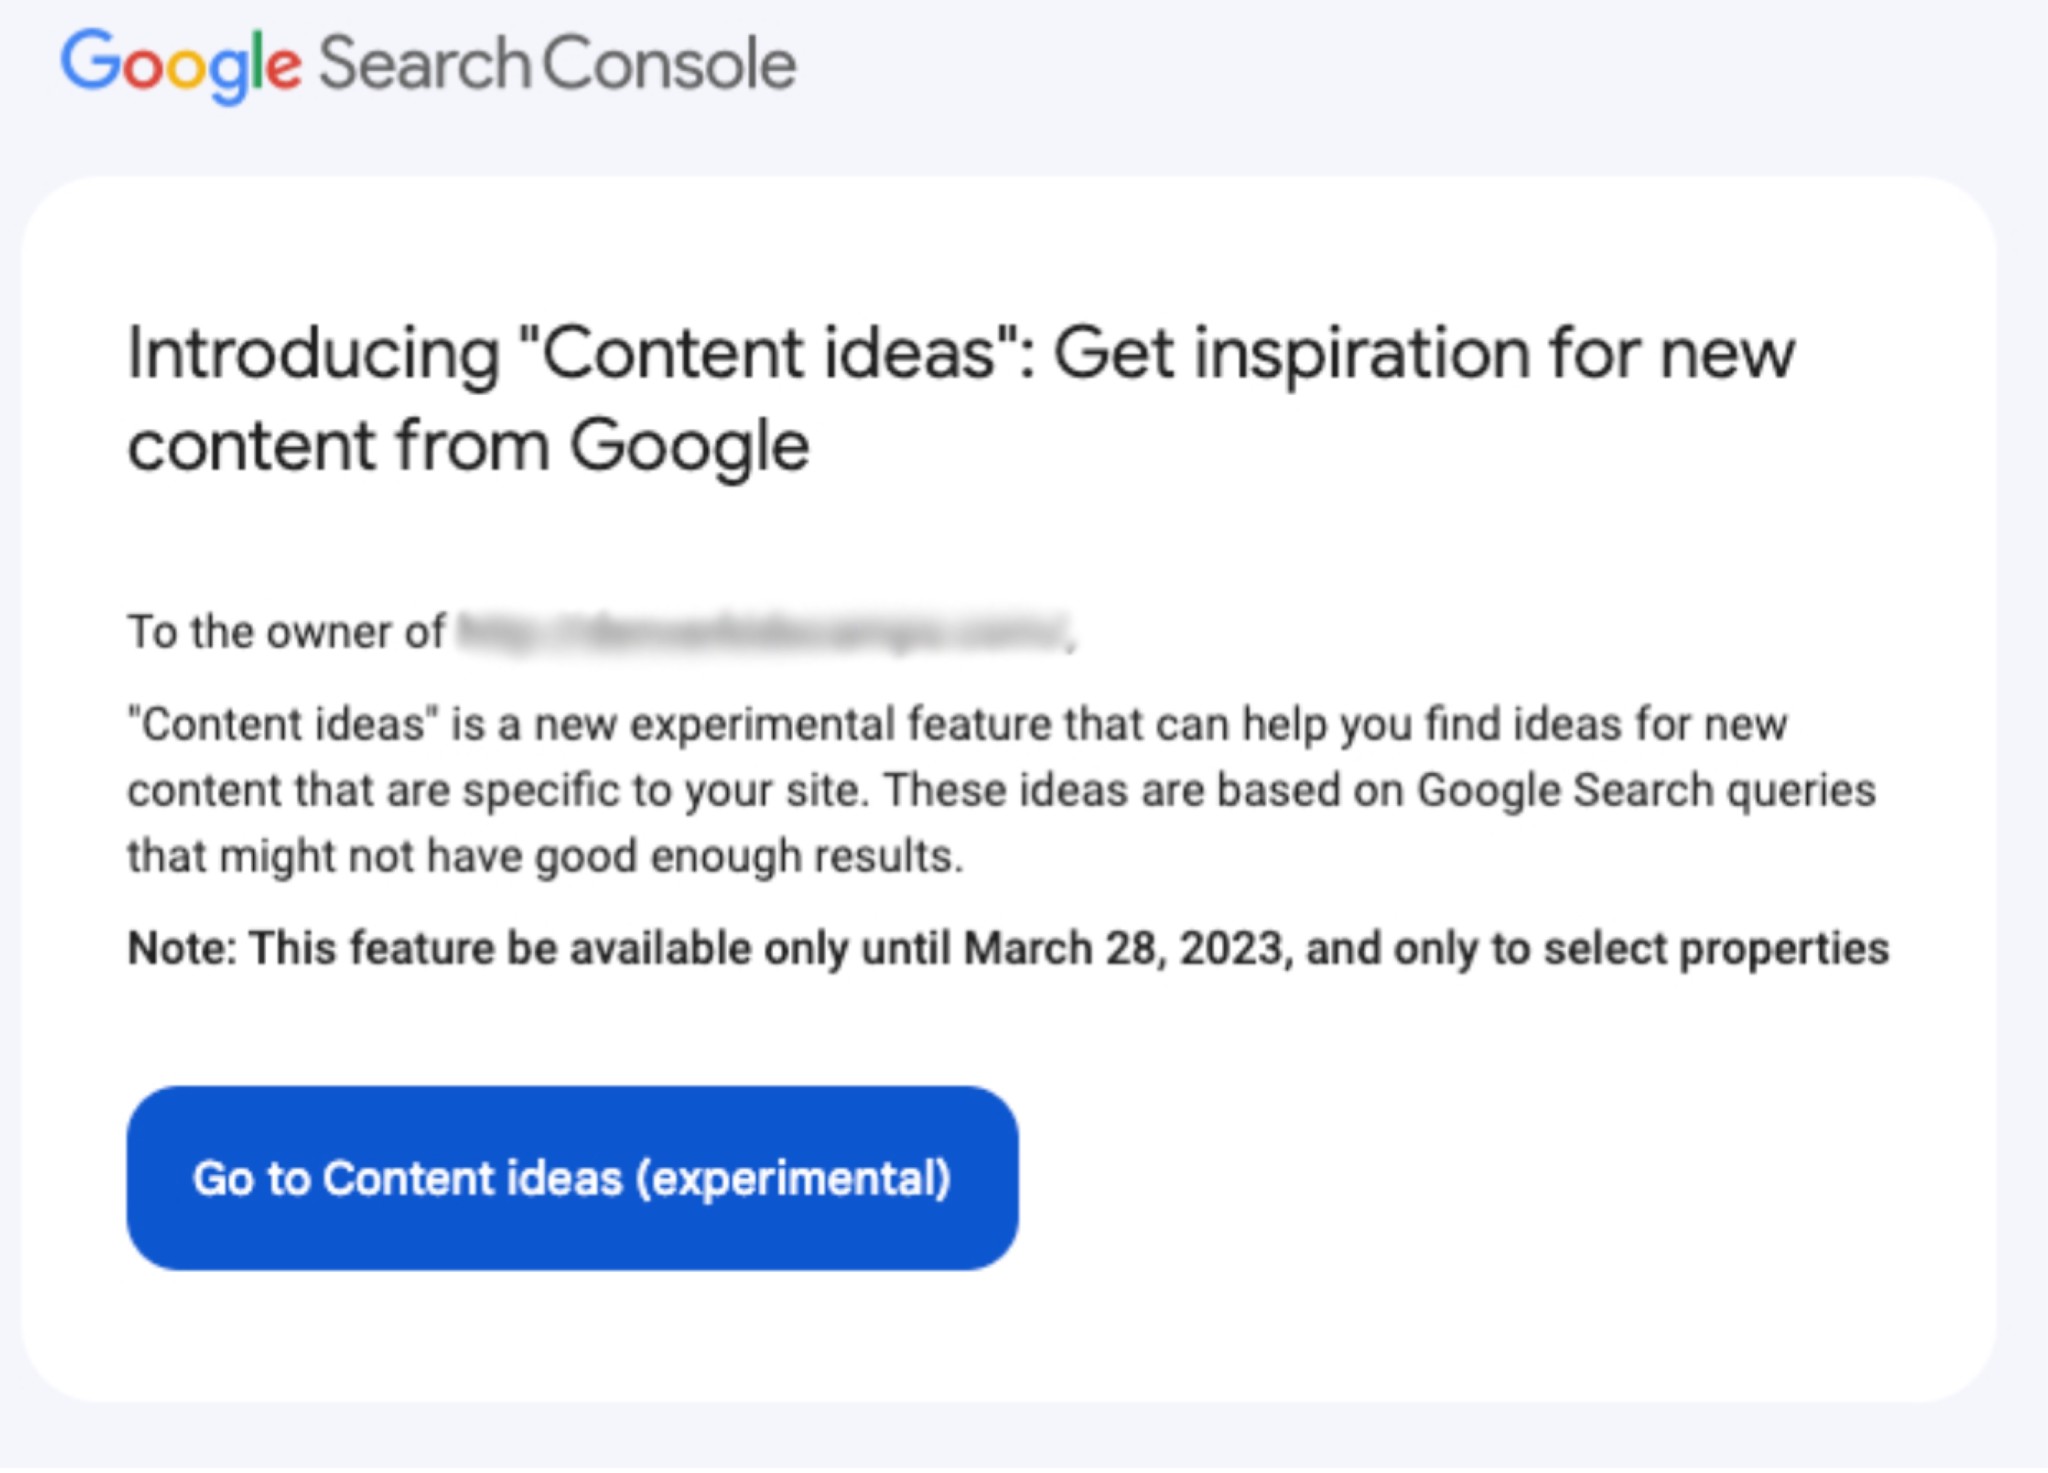 Google Search Console "Content Ideas & Inspiration" for SEO Strategy